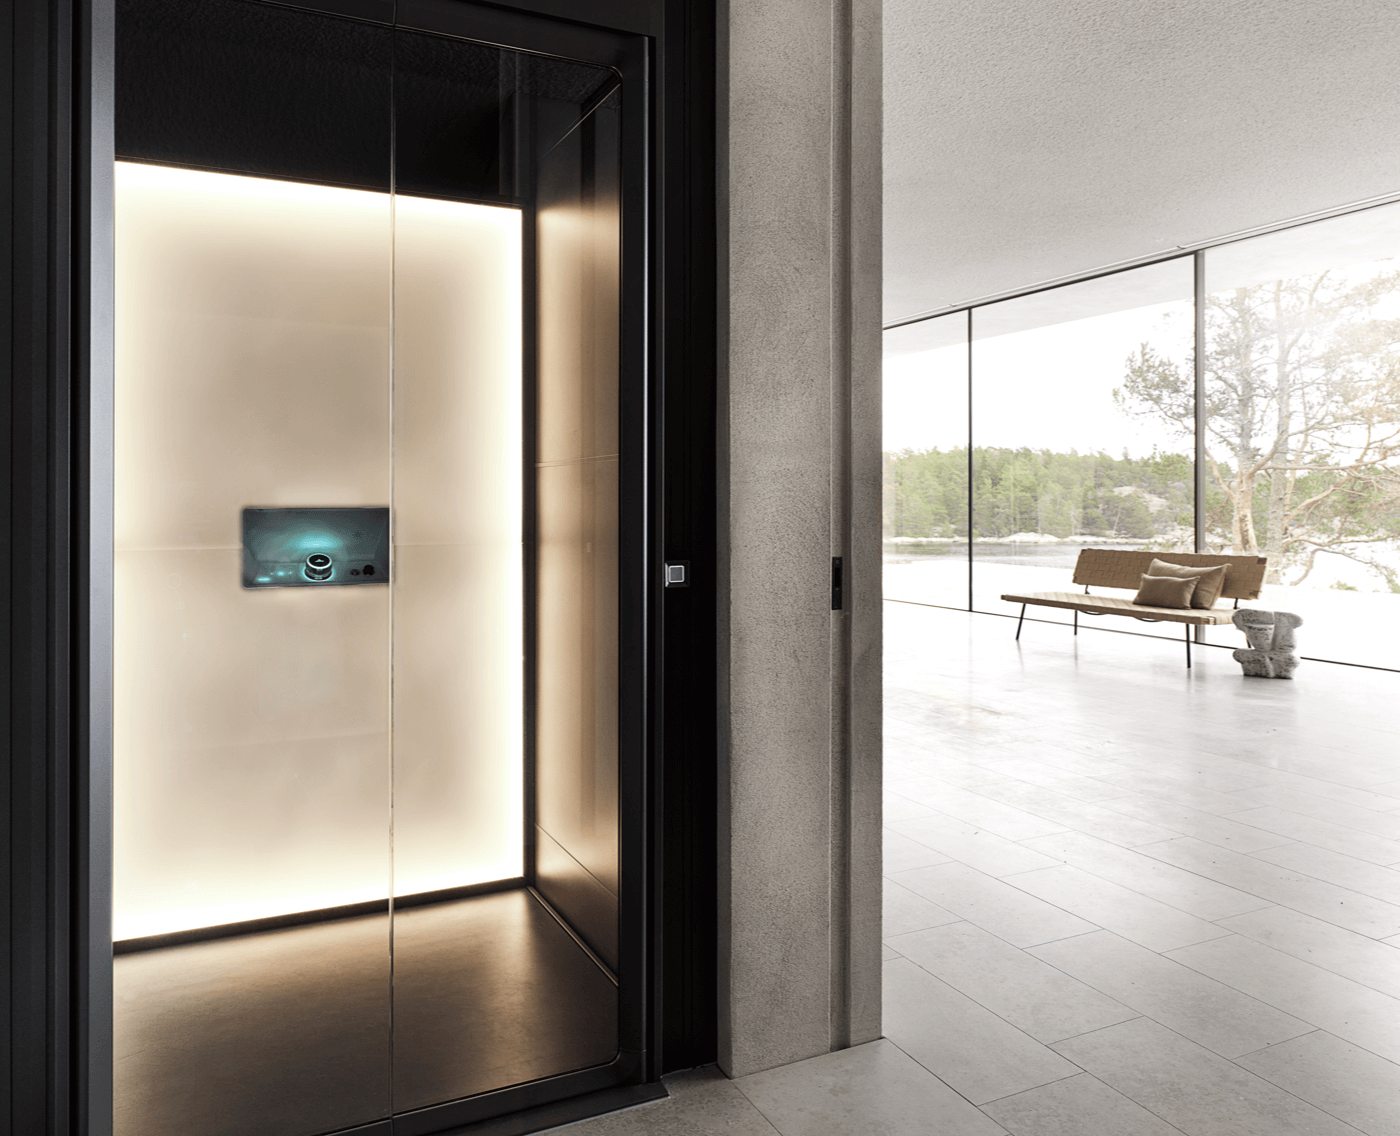 An home elevator from Aritco in a living room space